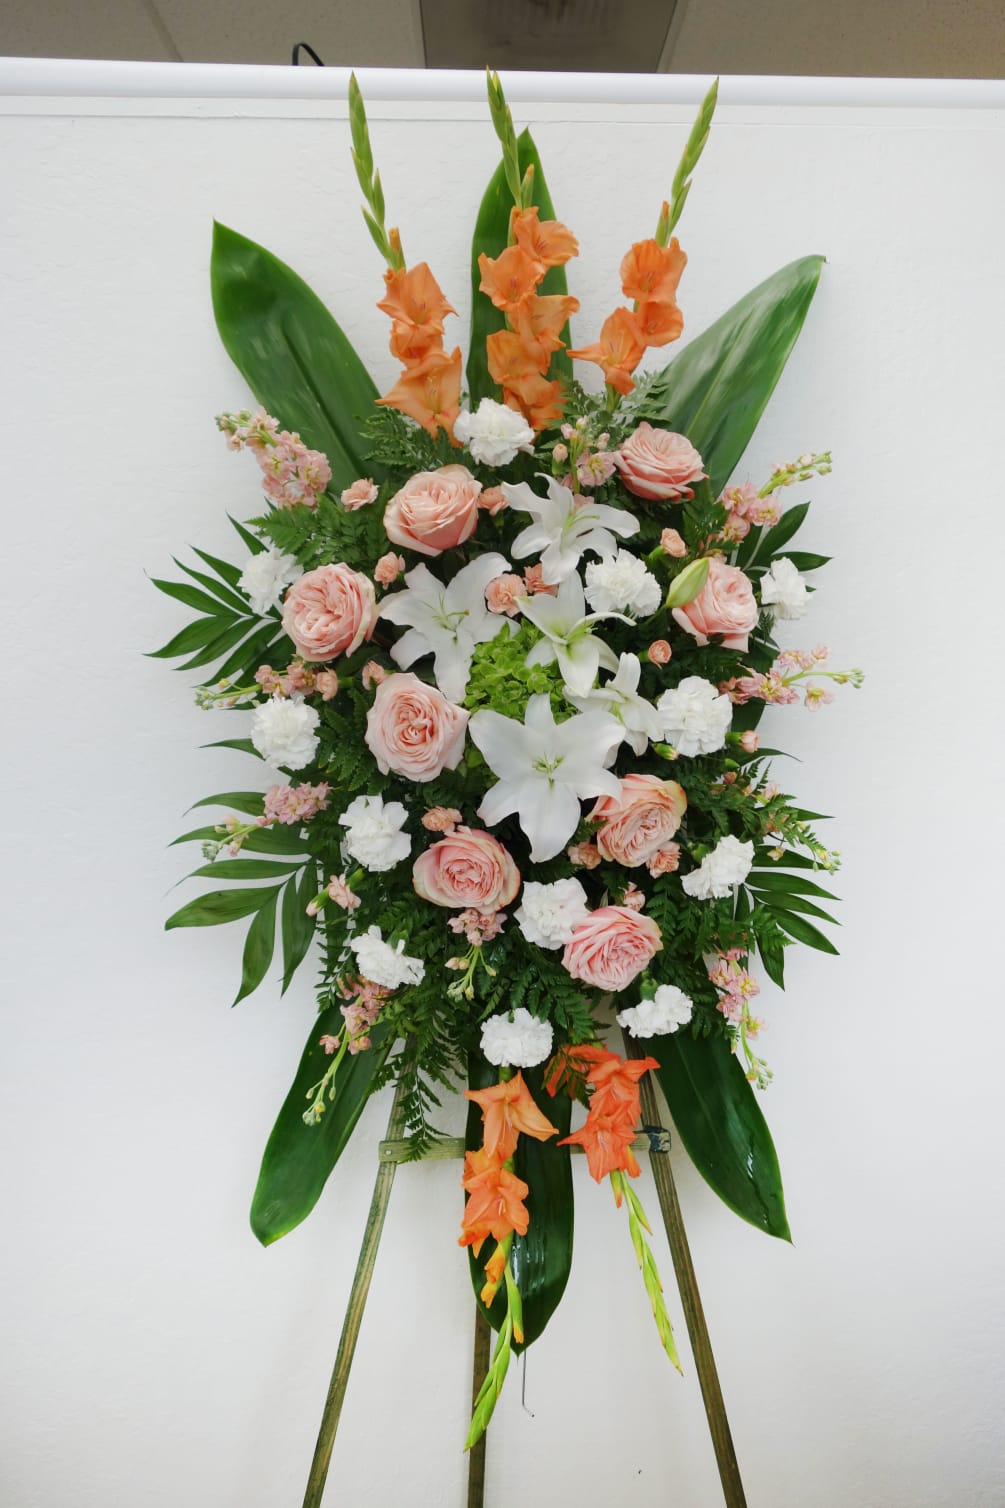 Standing spray of lilies and roses, gladiolus and snapdragons, carnations, and tropical